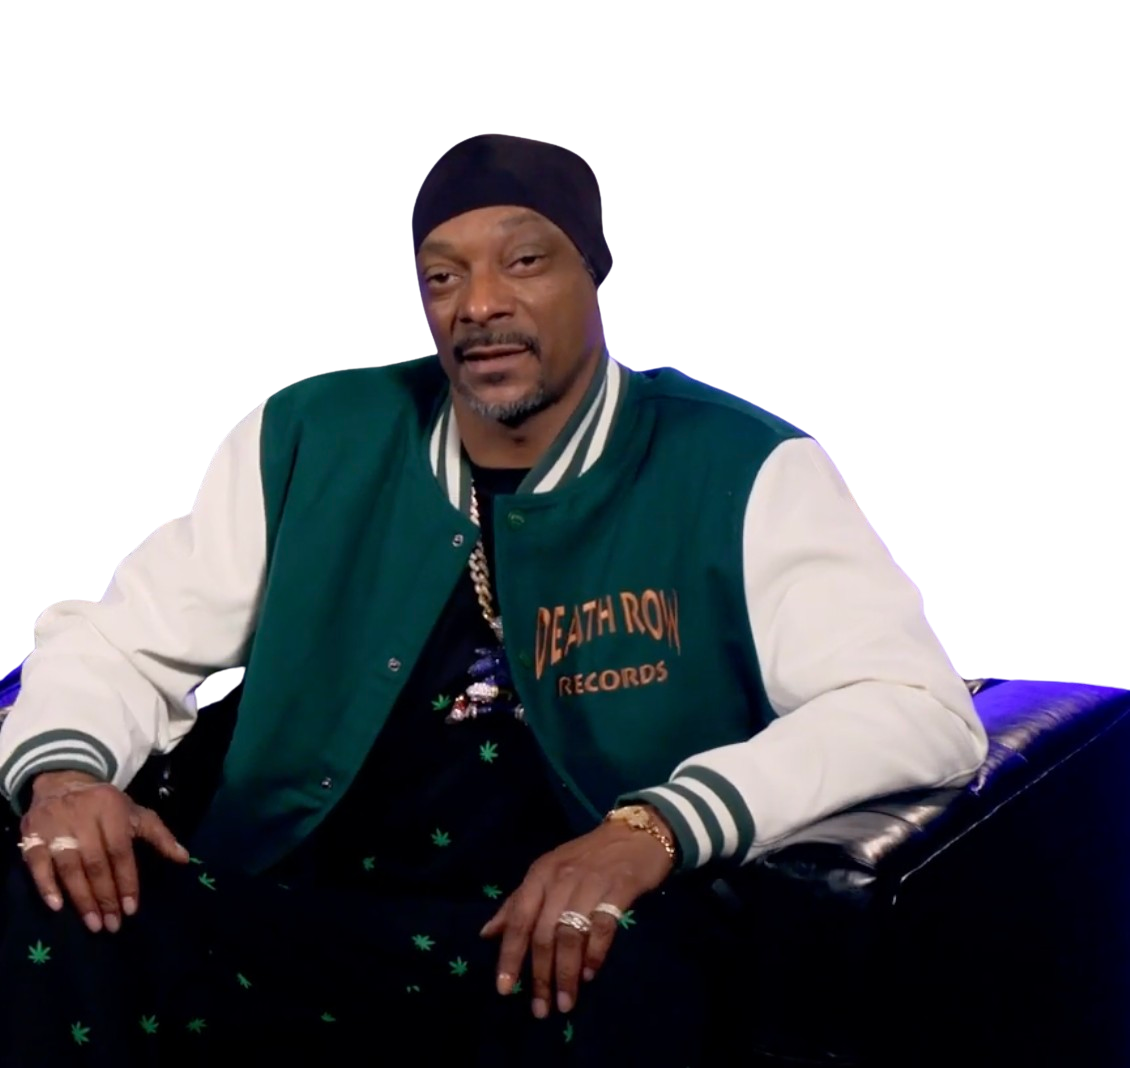 Snoop Dogg and Tika Sumpter on The Underdoggs; Snoop's Coaching Style, What to take From the Film